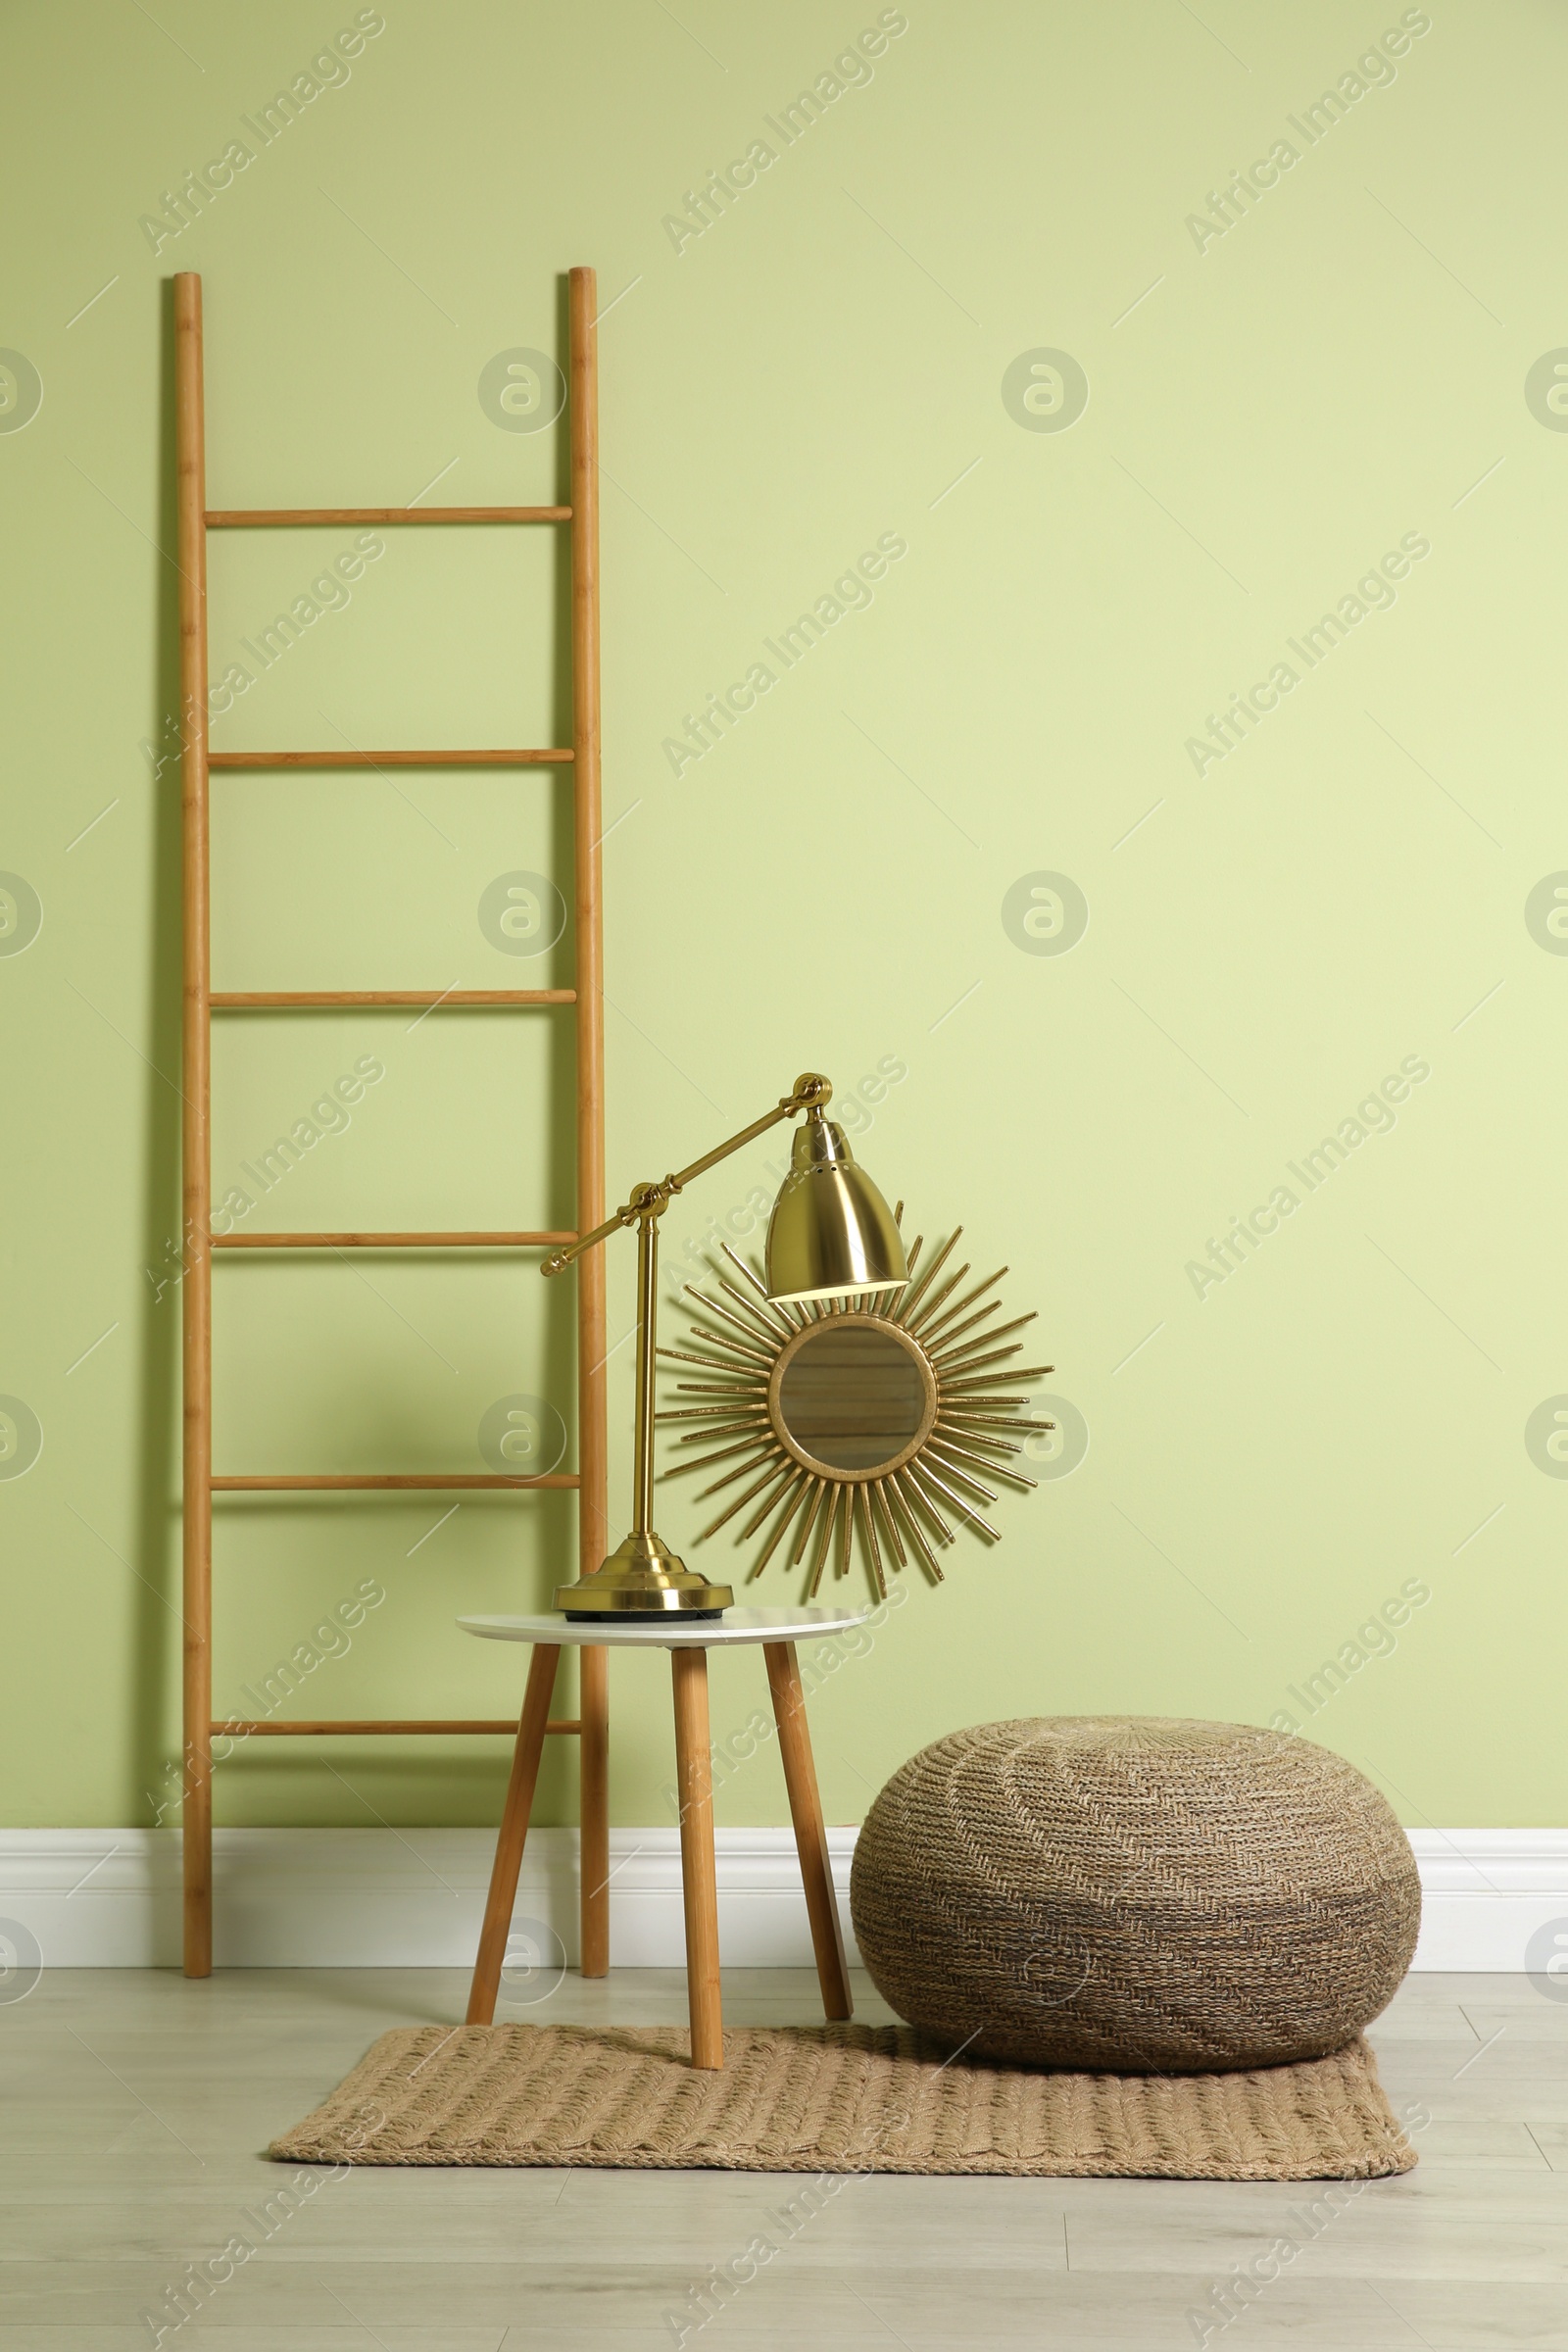 Photo of Stylish room interior with comfortable knitted pouf and decor elements near light green wall